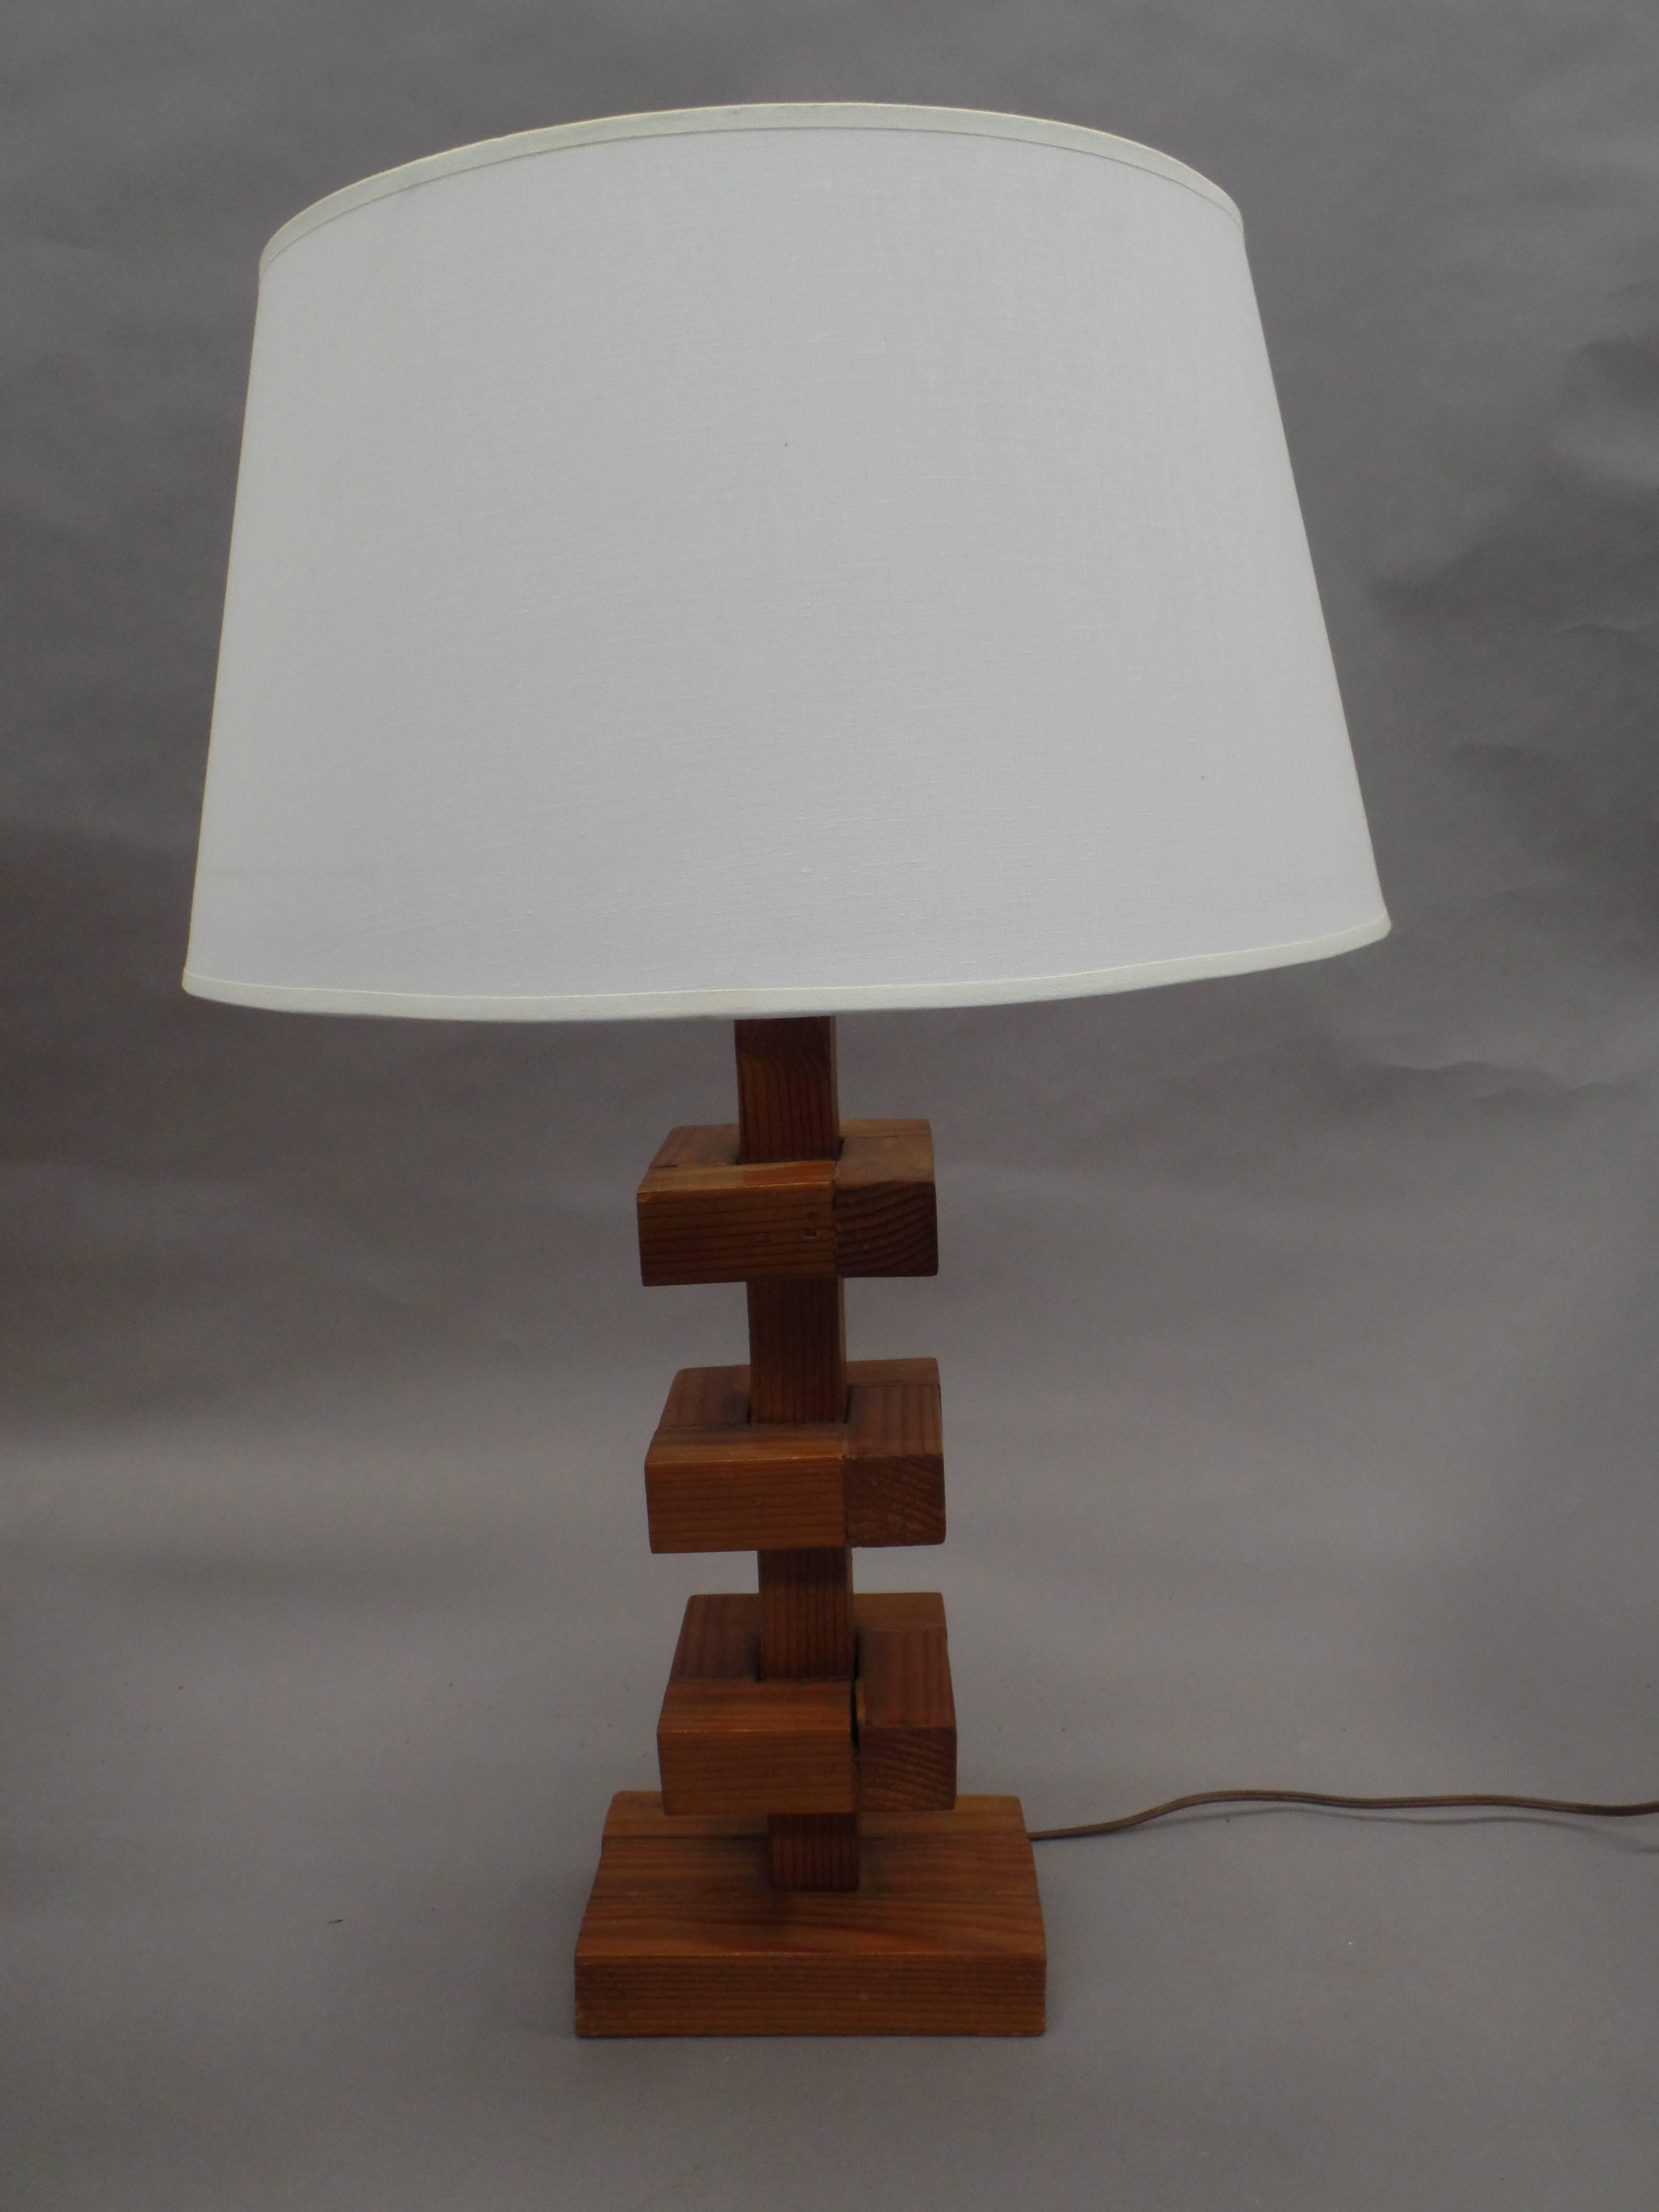 European Important Pair of Constructivist Table Lamps in the Style of Alexandre Rodchenko